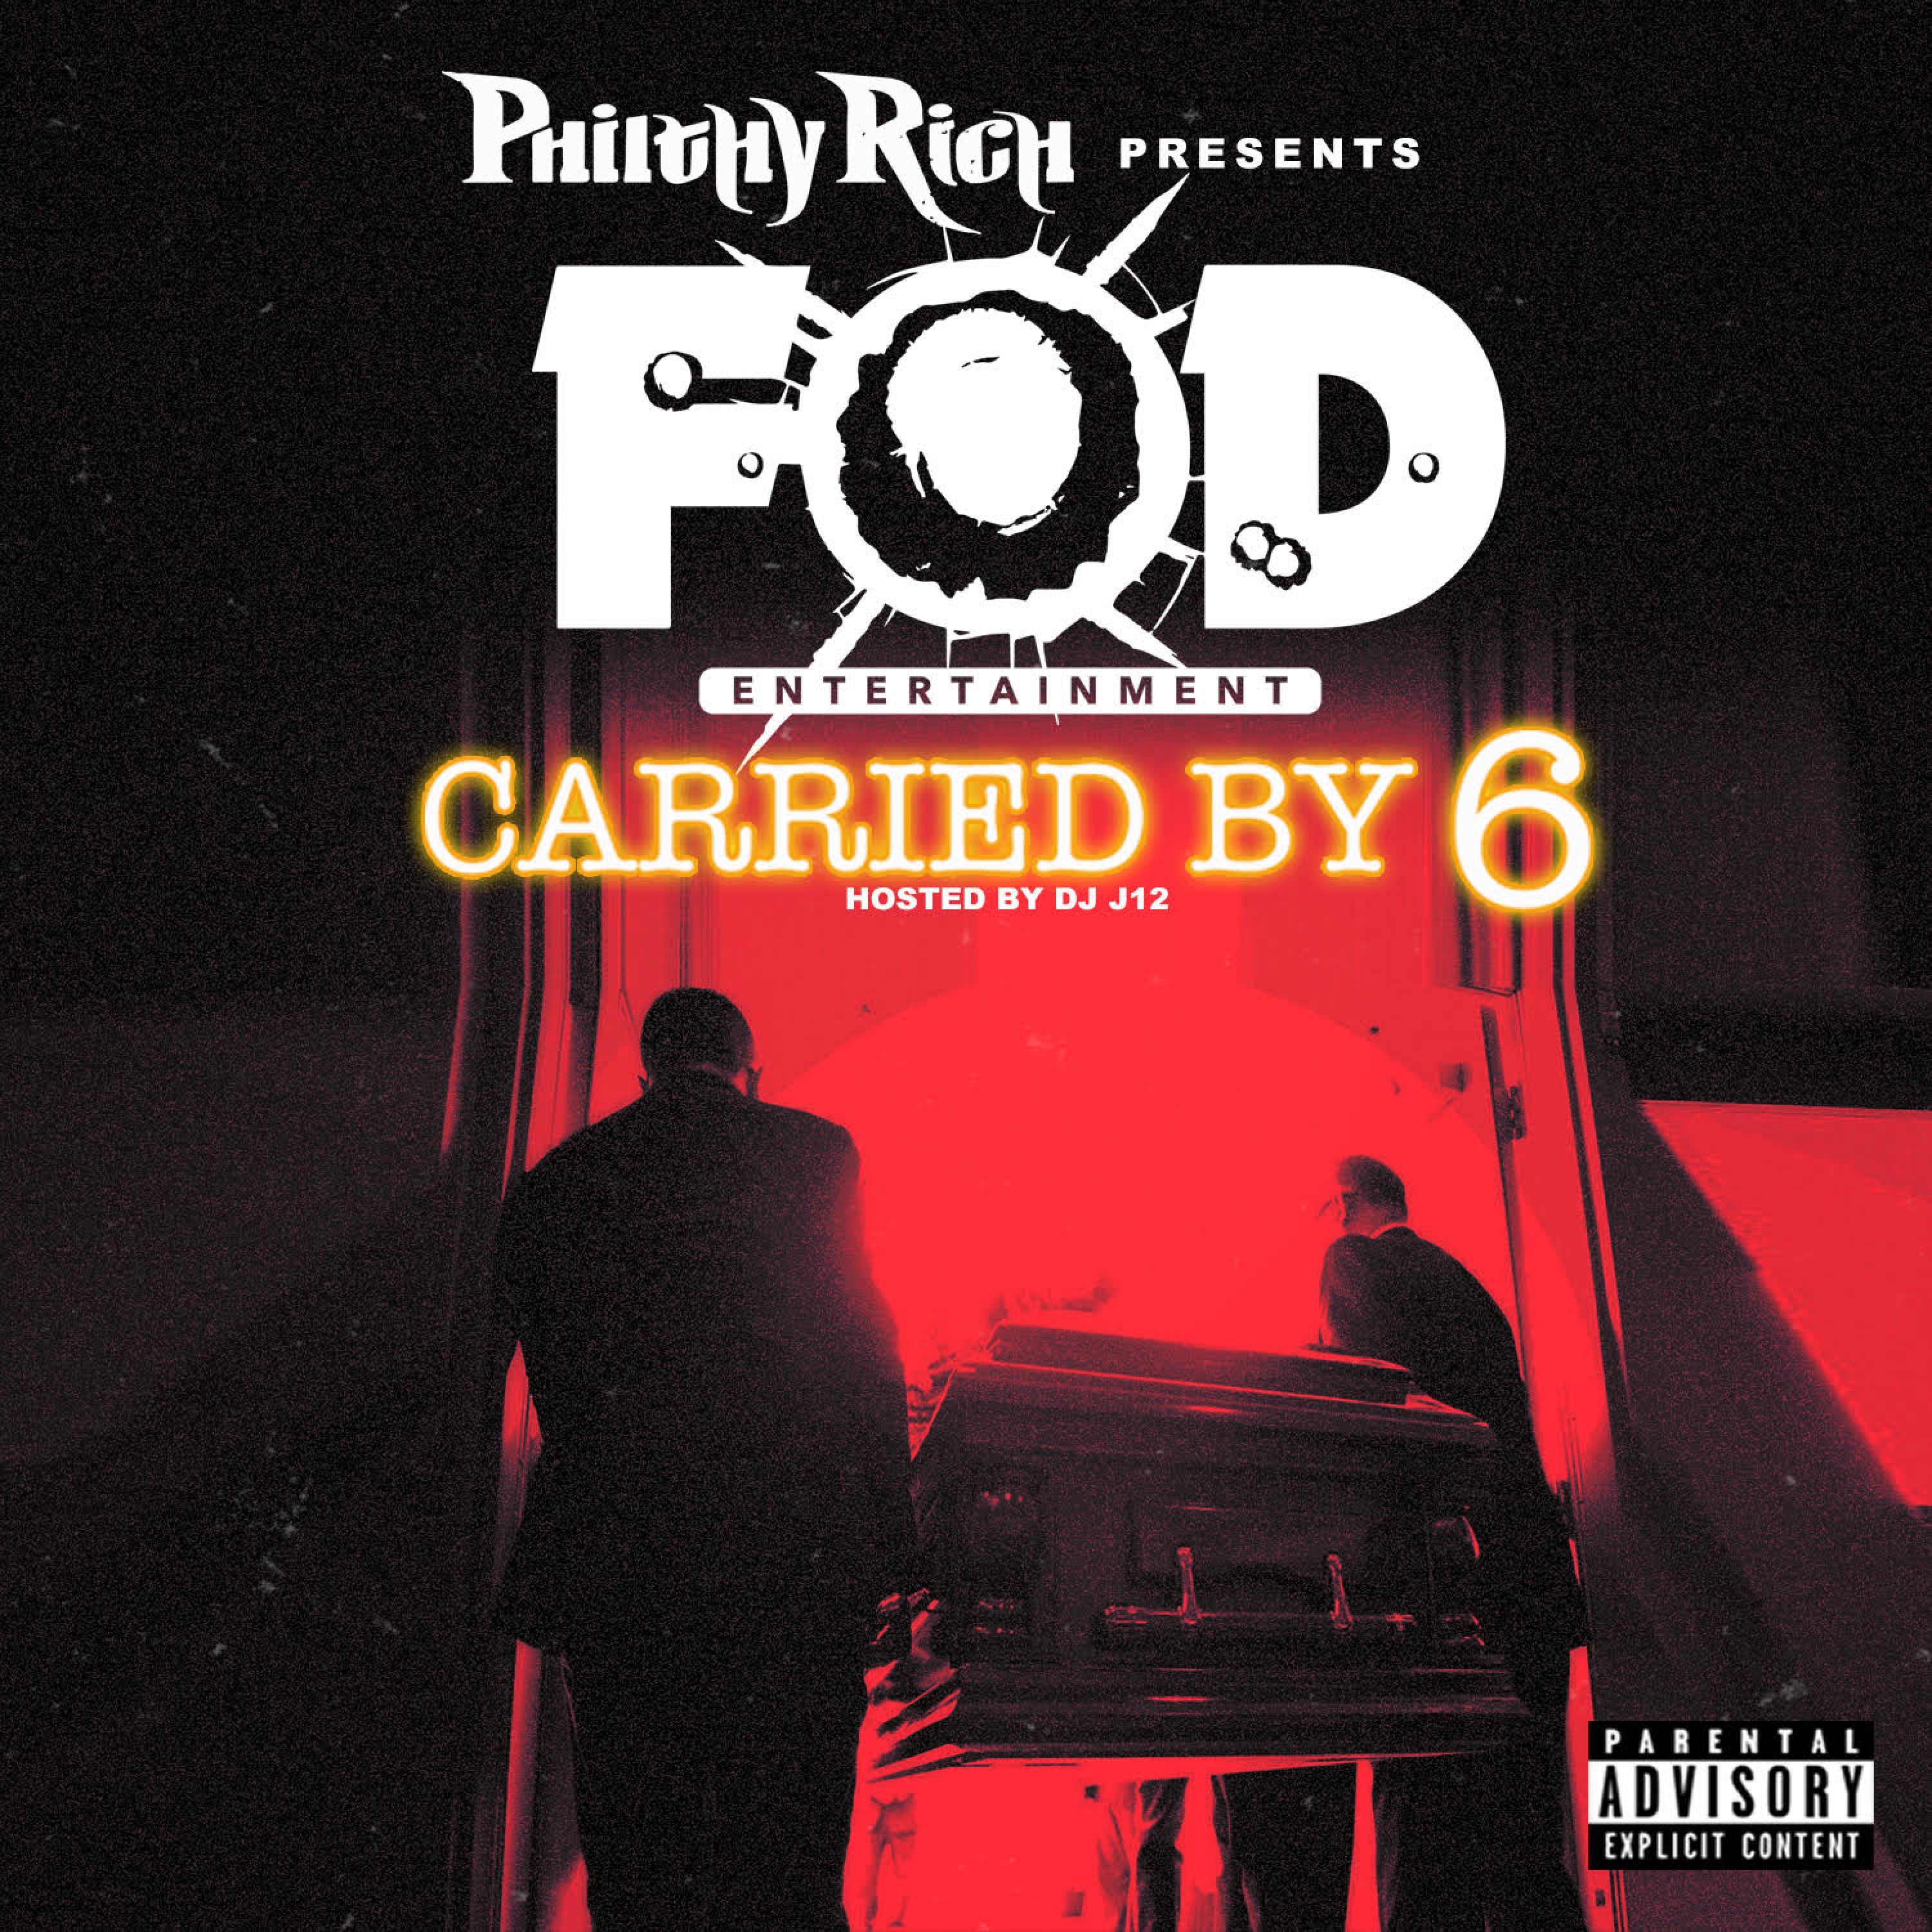 Philthy Rich Presents FOD Carried by 6